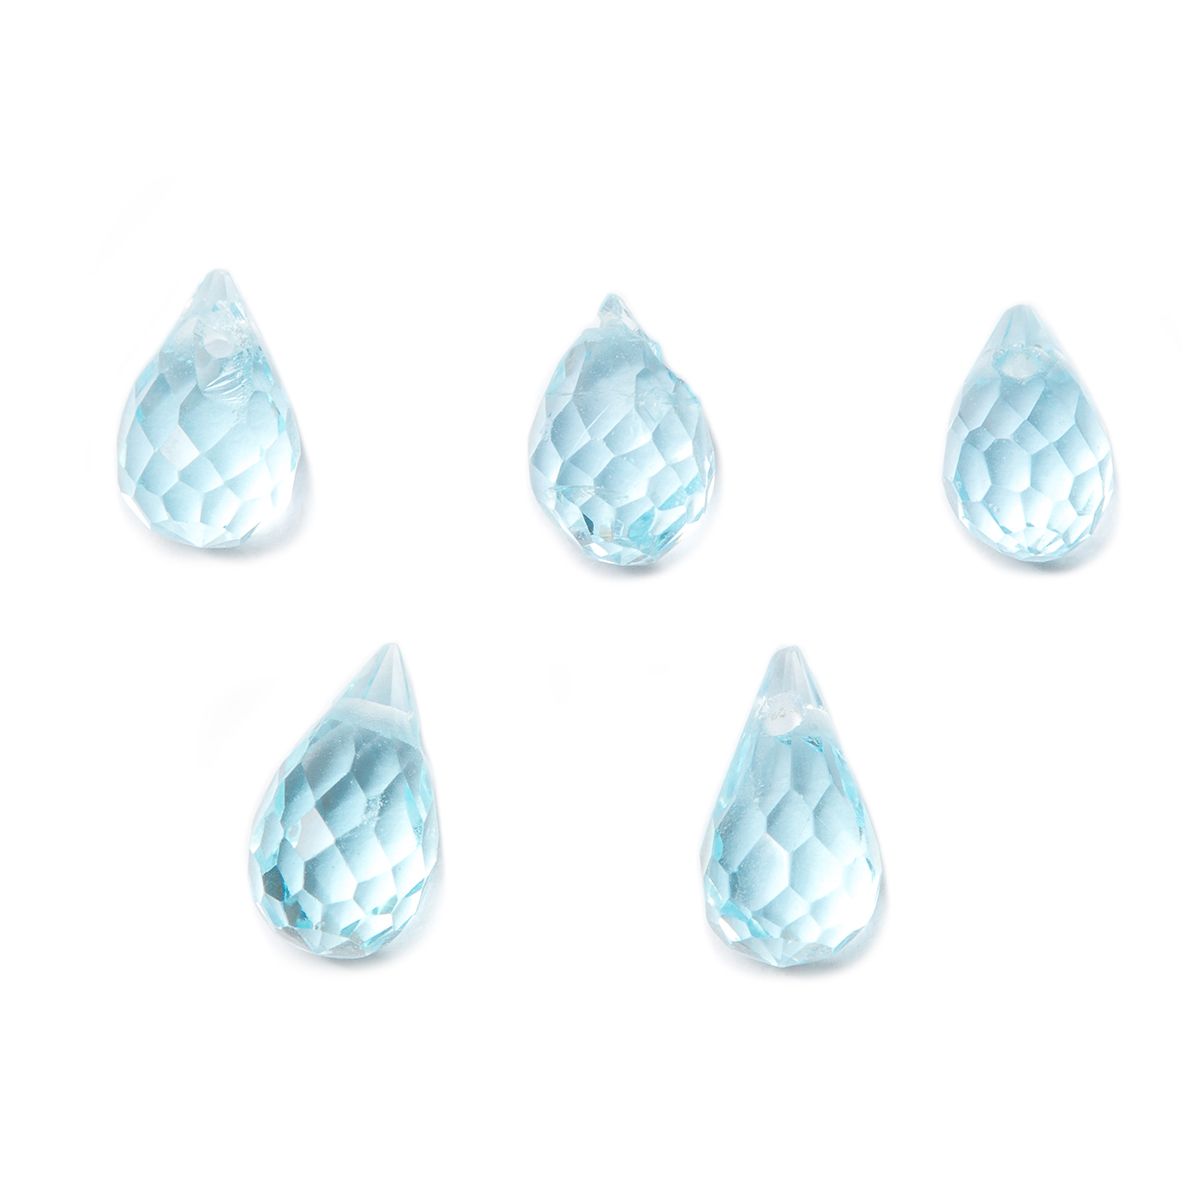 Sky Blue Topaz Faceted Drop Briolette Beads - Approx From 4mm, Pack of 10 Beads